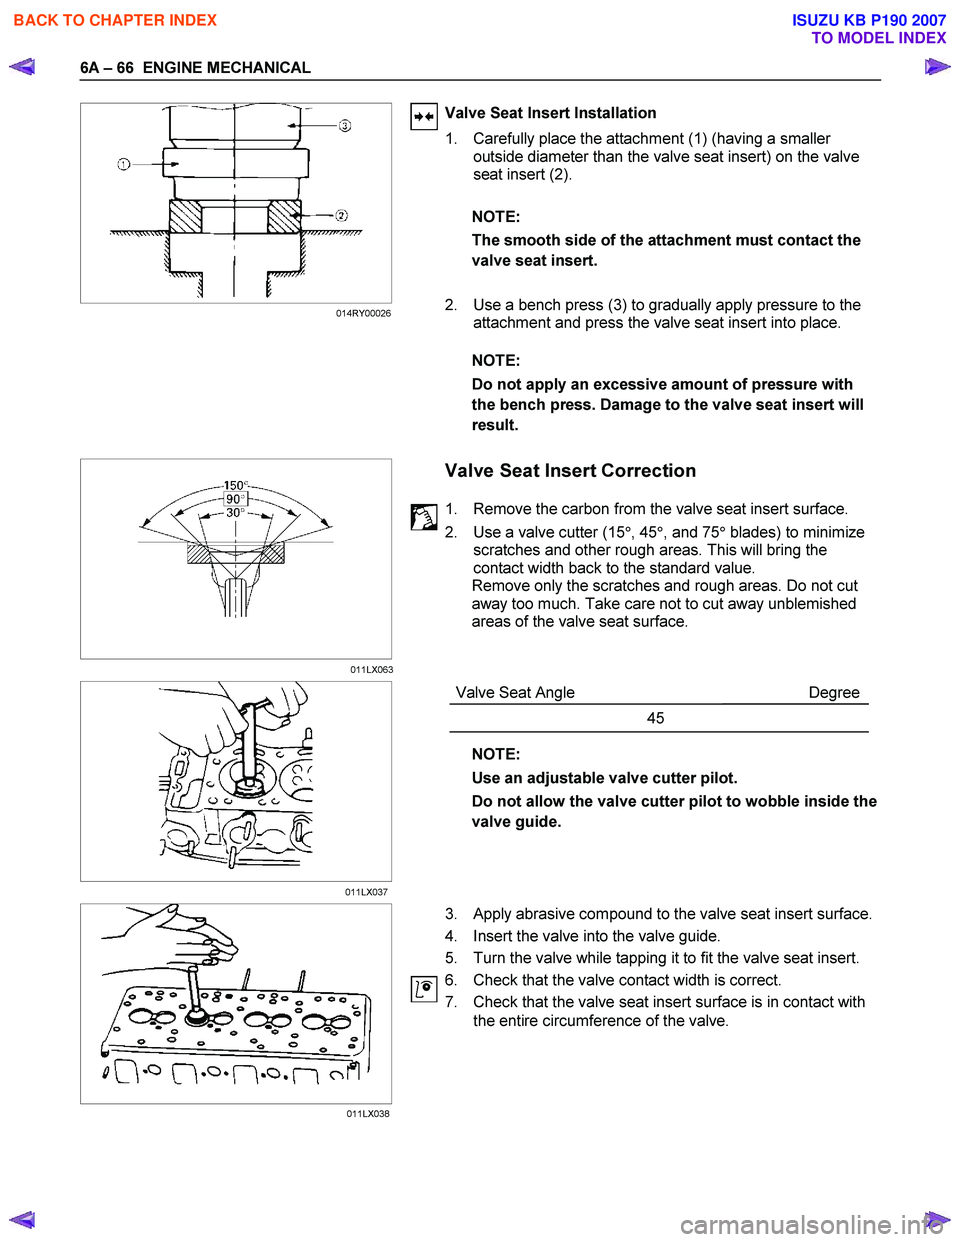 ISUZU KB P190 2007  Workshop Repair Manual 6A – 66  ENGINE MECHANICAL 
 
 
 Valve Seat Insert Installation  
1.  Carefully place the attachment (1) (having a smaller  outside diameter than the valve seat insert) on the valve  
seat insert (2